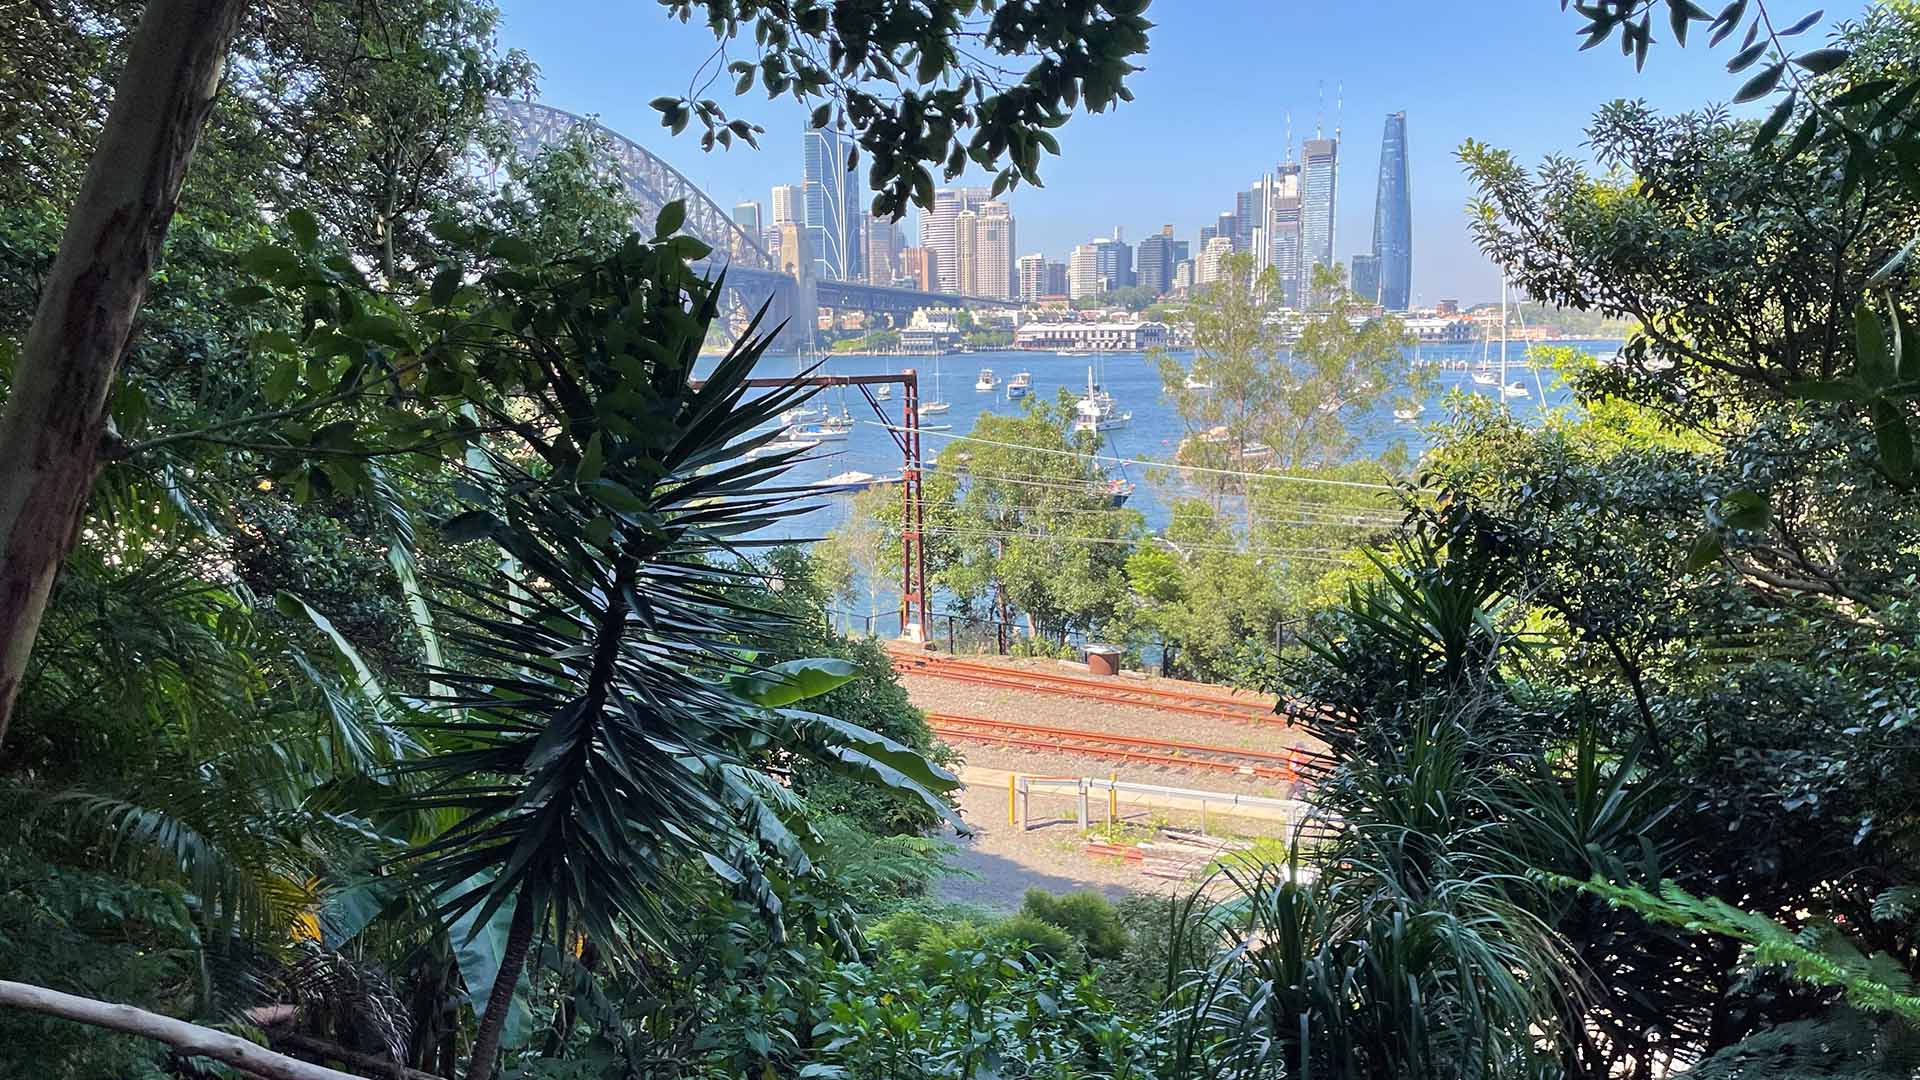 The NSW Government Has Proposed a New York City-Style High Line with Harbour Views Along the Milsons Point Foreshore